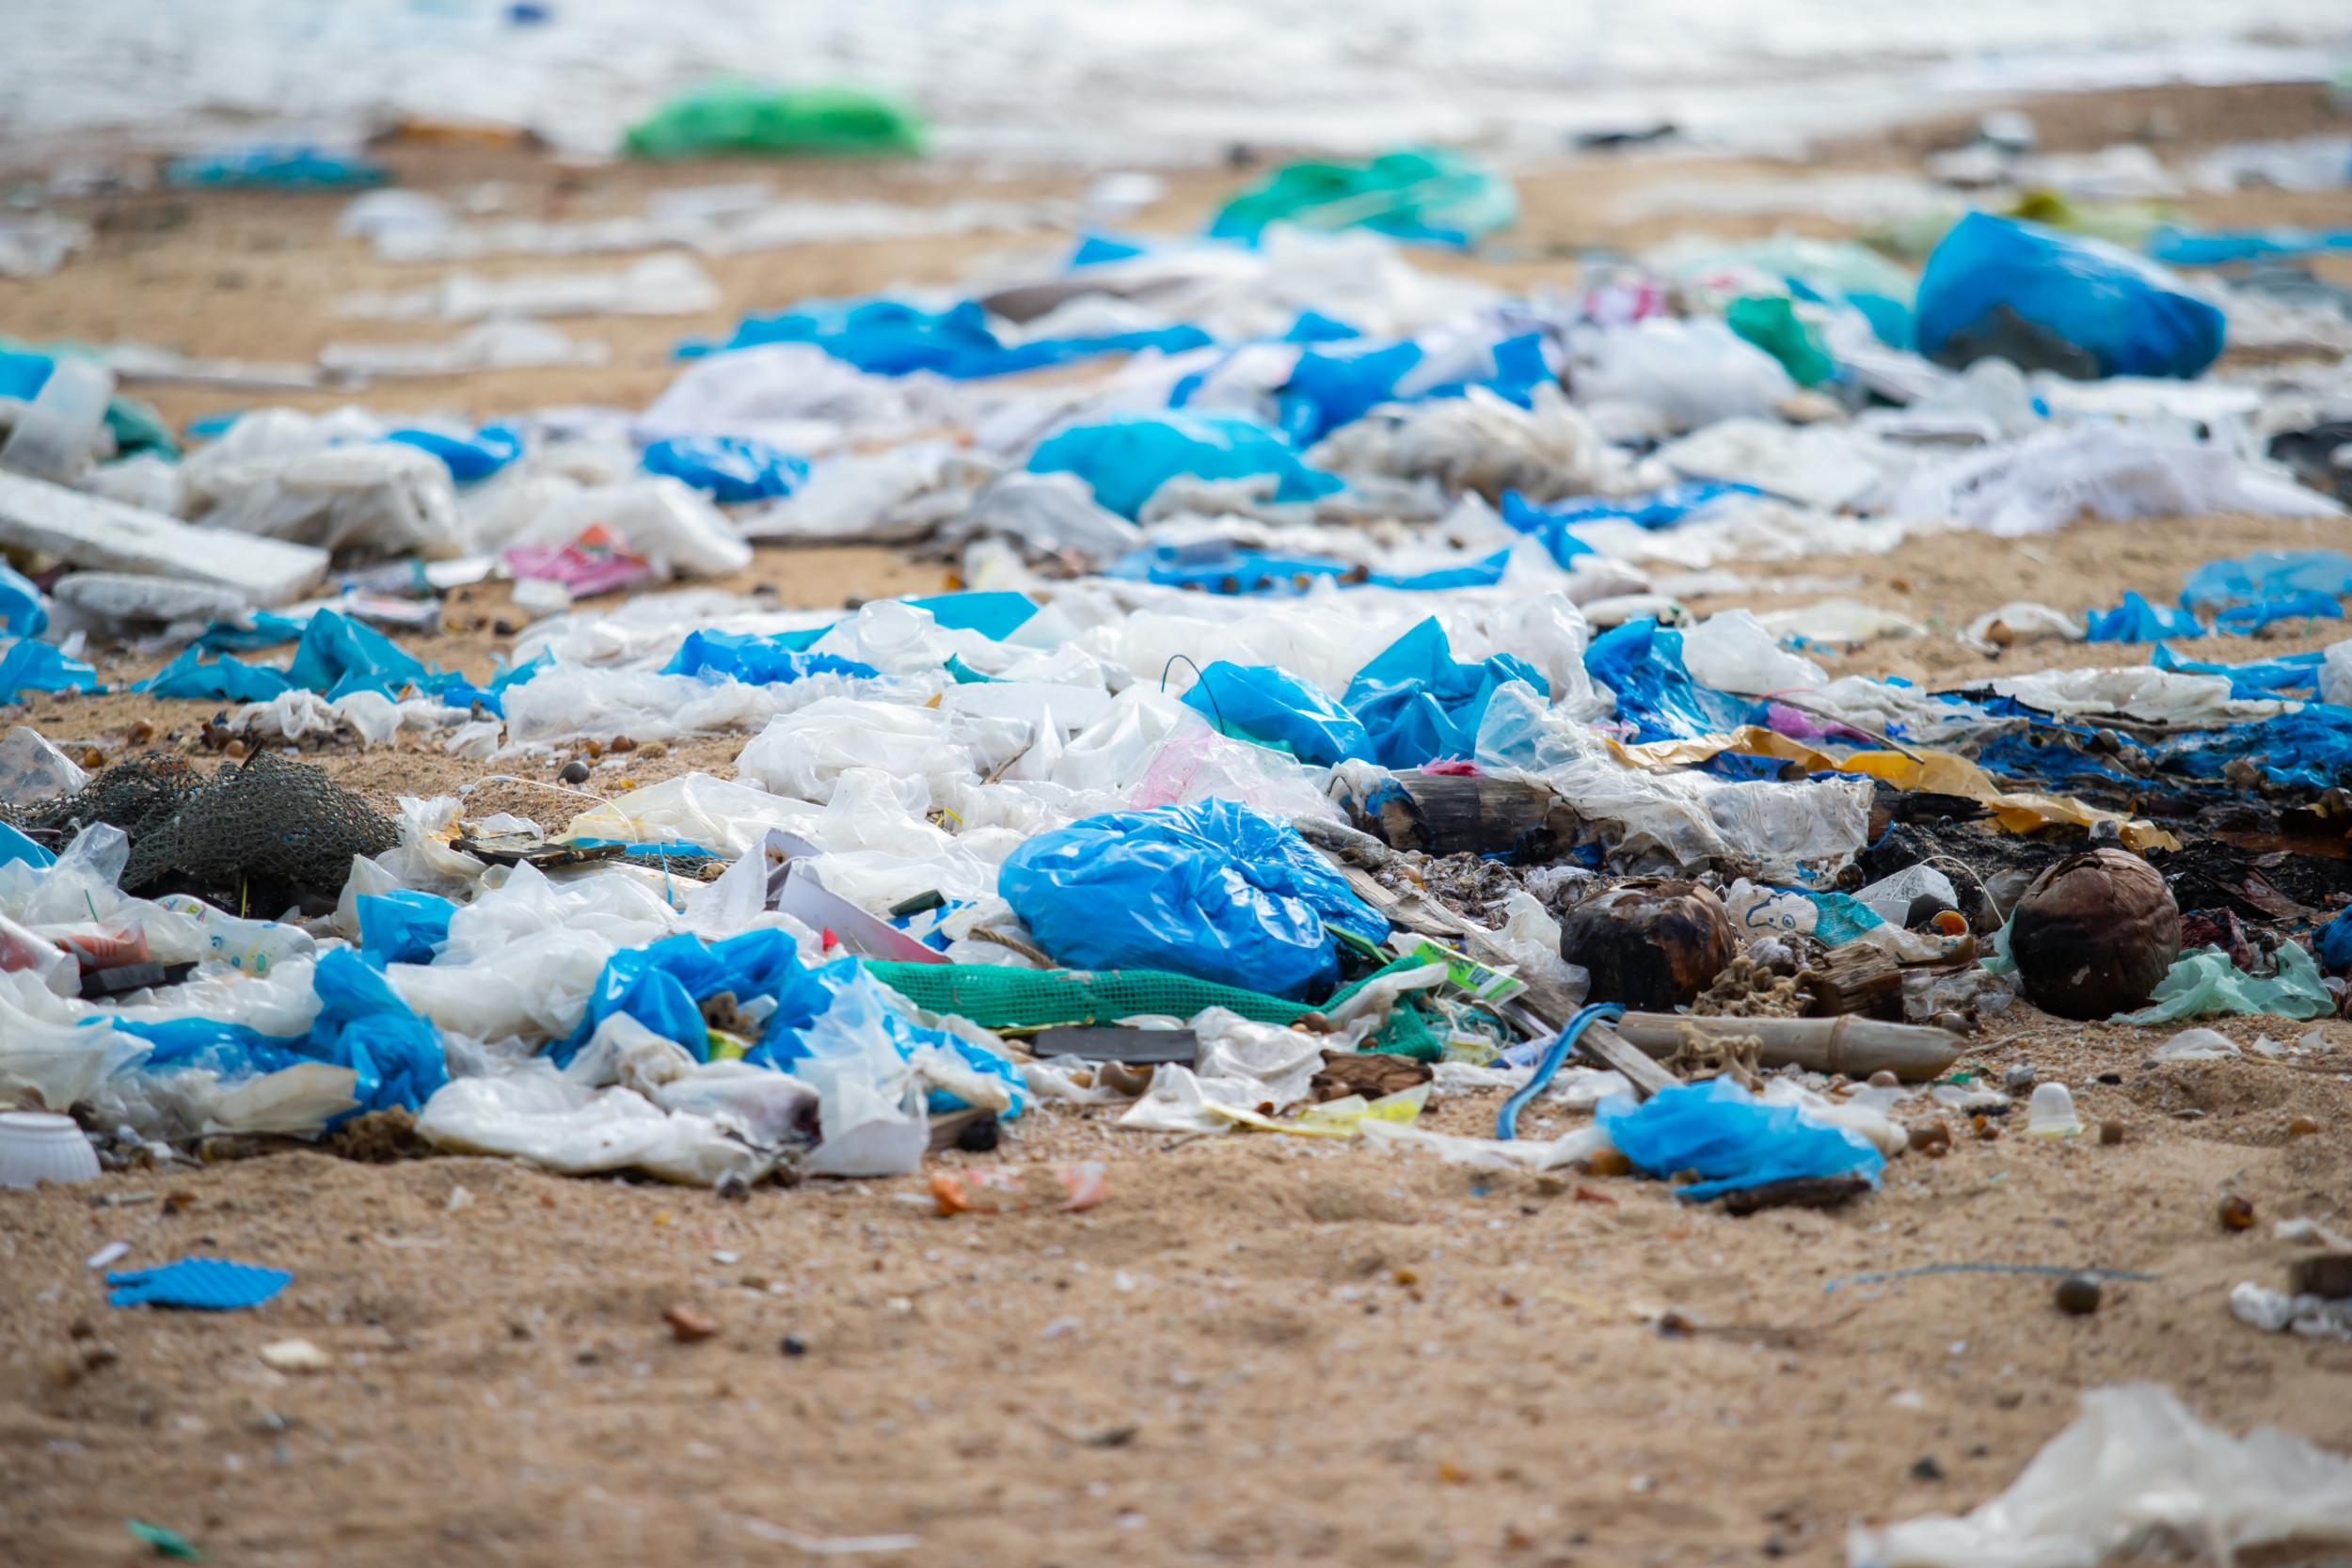 Plastic recycling could be more dangerous than you think